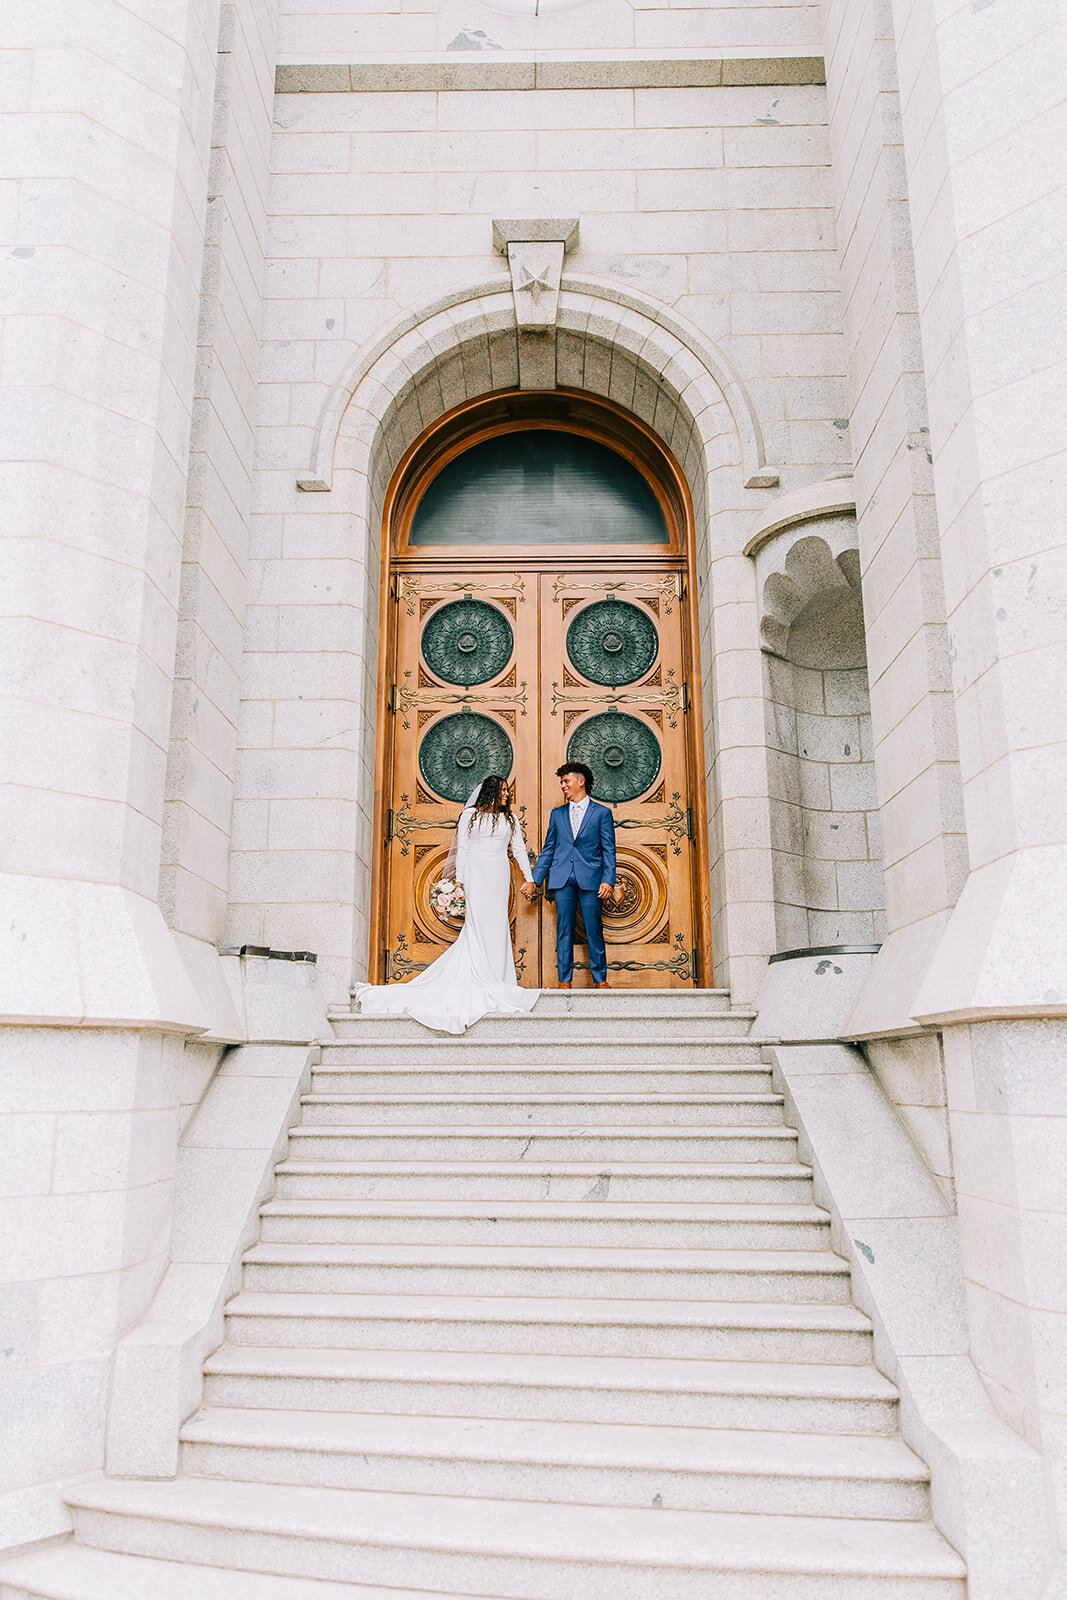  bridals bride and groom holding hands at the top of the stairs big beautiful door salt lake city utah lds temple pictures wedding day photos bridals stairs temple square professional wedding day photography bella alder affordable wedding photographe